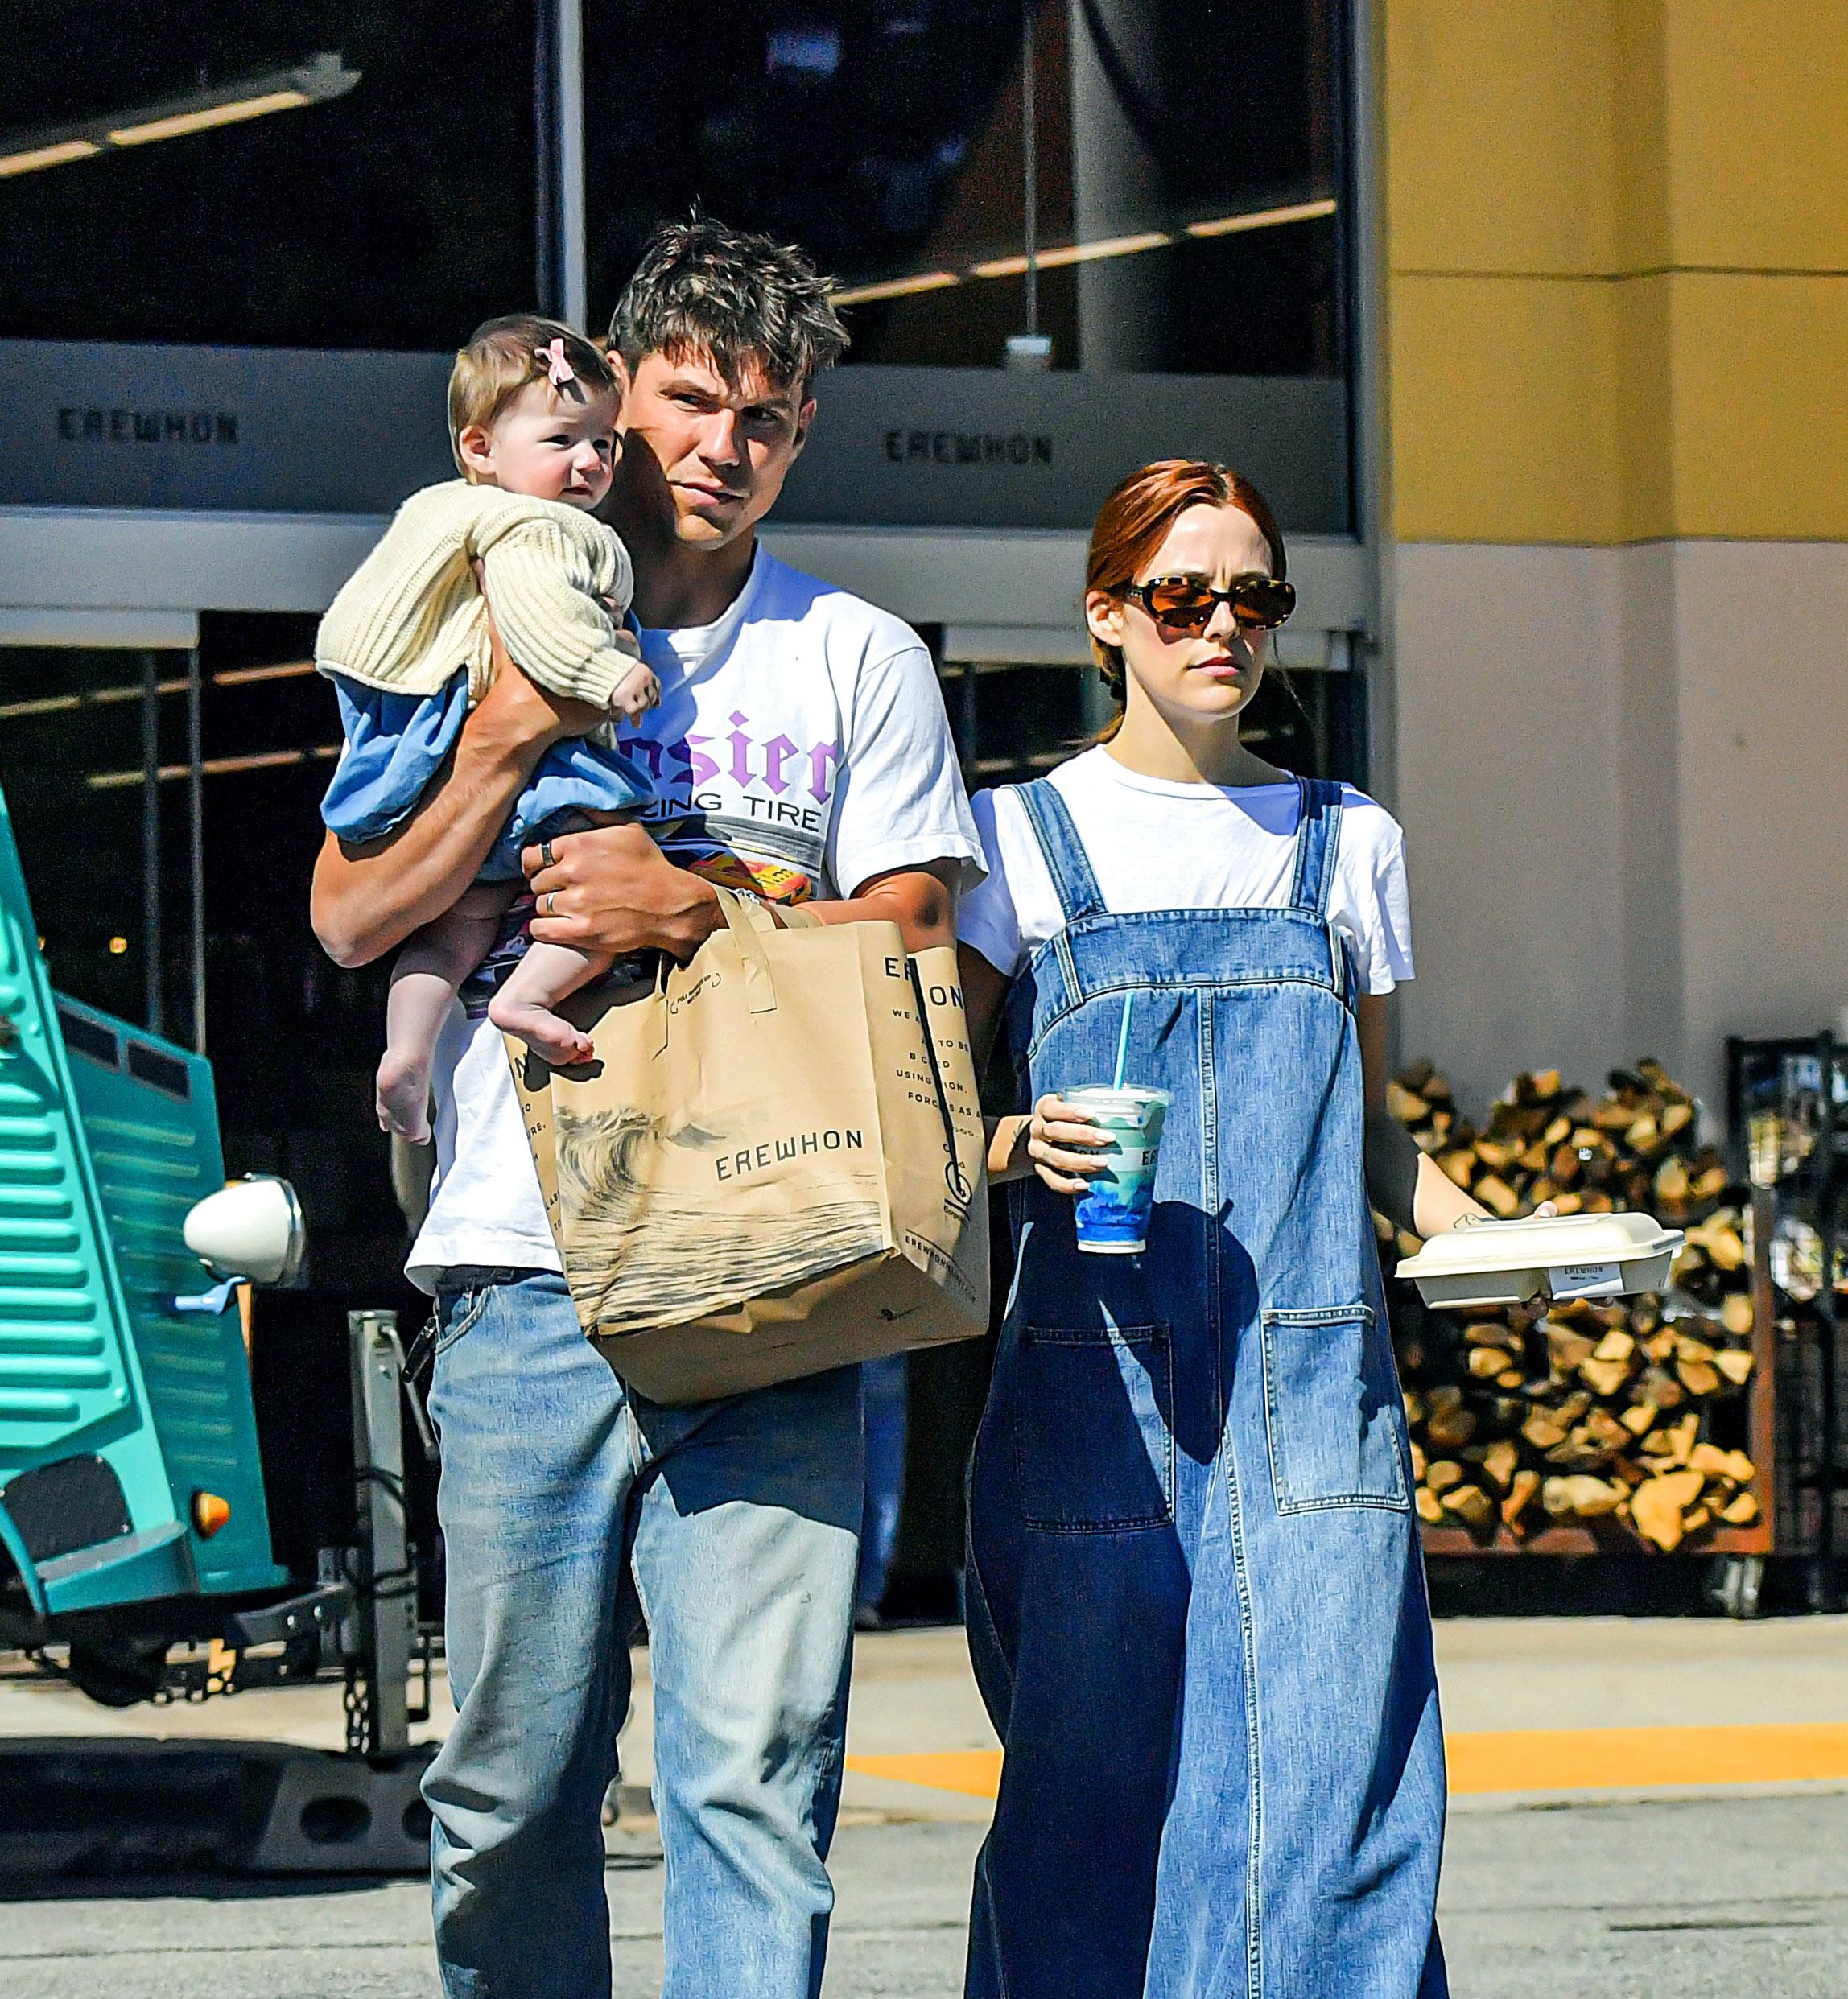 Riley Keough and her husband Ben Smith-Petersen are spotted out with their baby girl during grocery store run at Erewhon in Calabasas, CA.